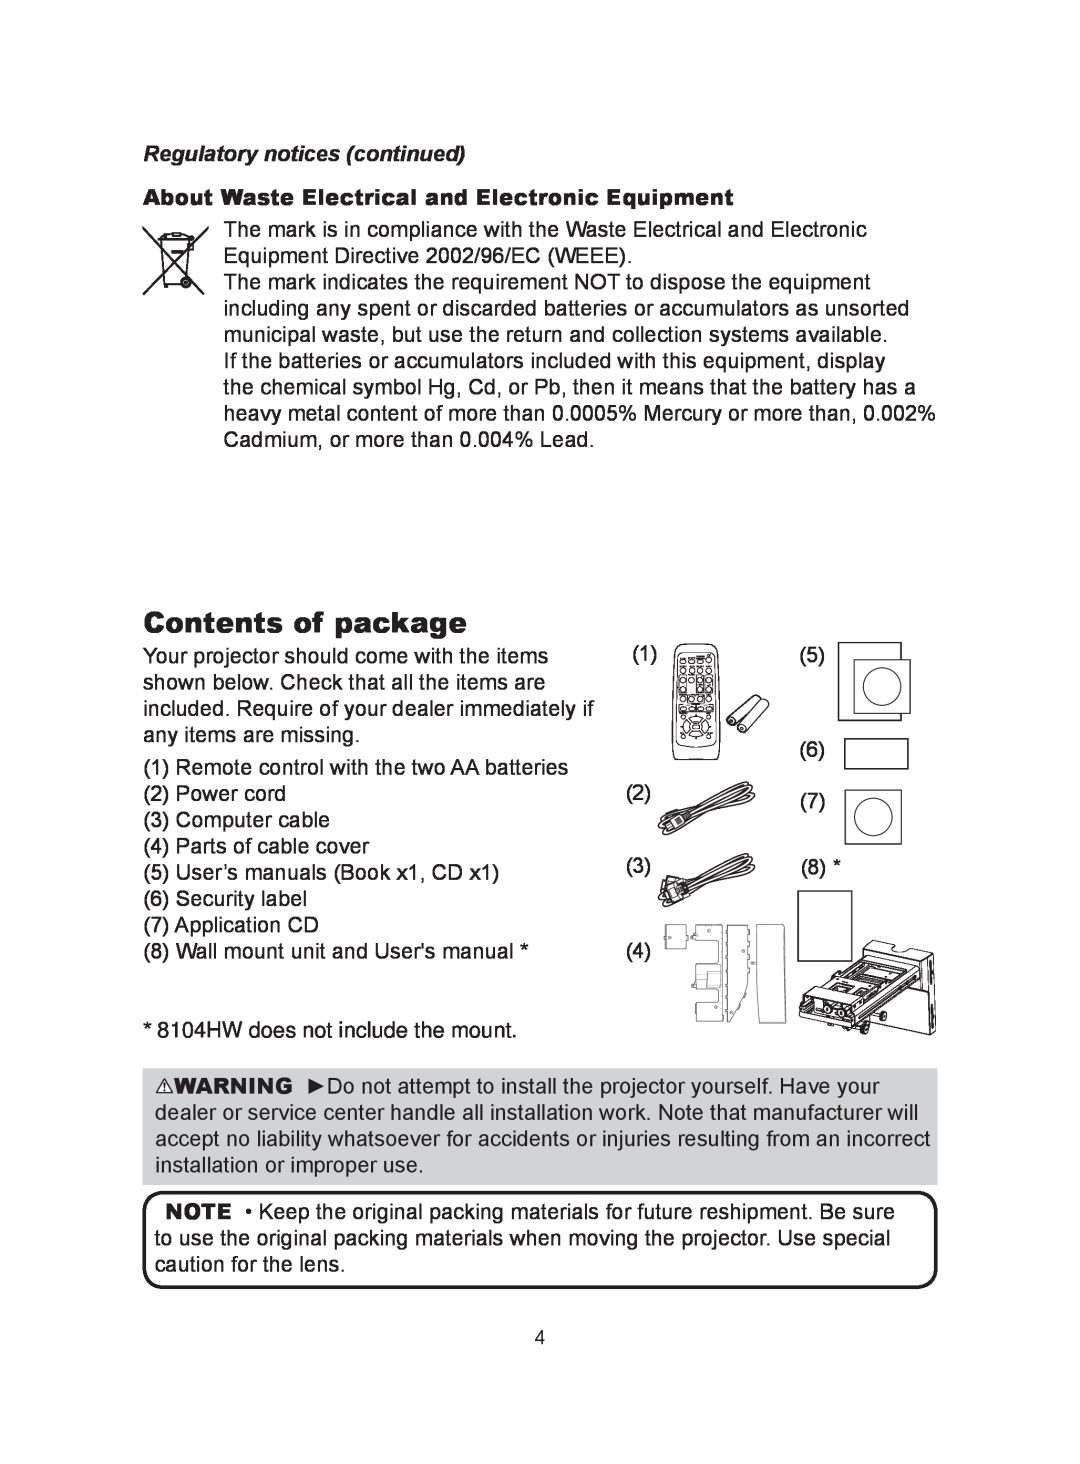 Dukane 8104HW Contents of package, Regulatory notices continued, About Waste Electrical and Electronic Equipment 